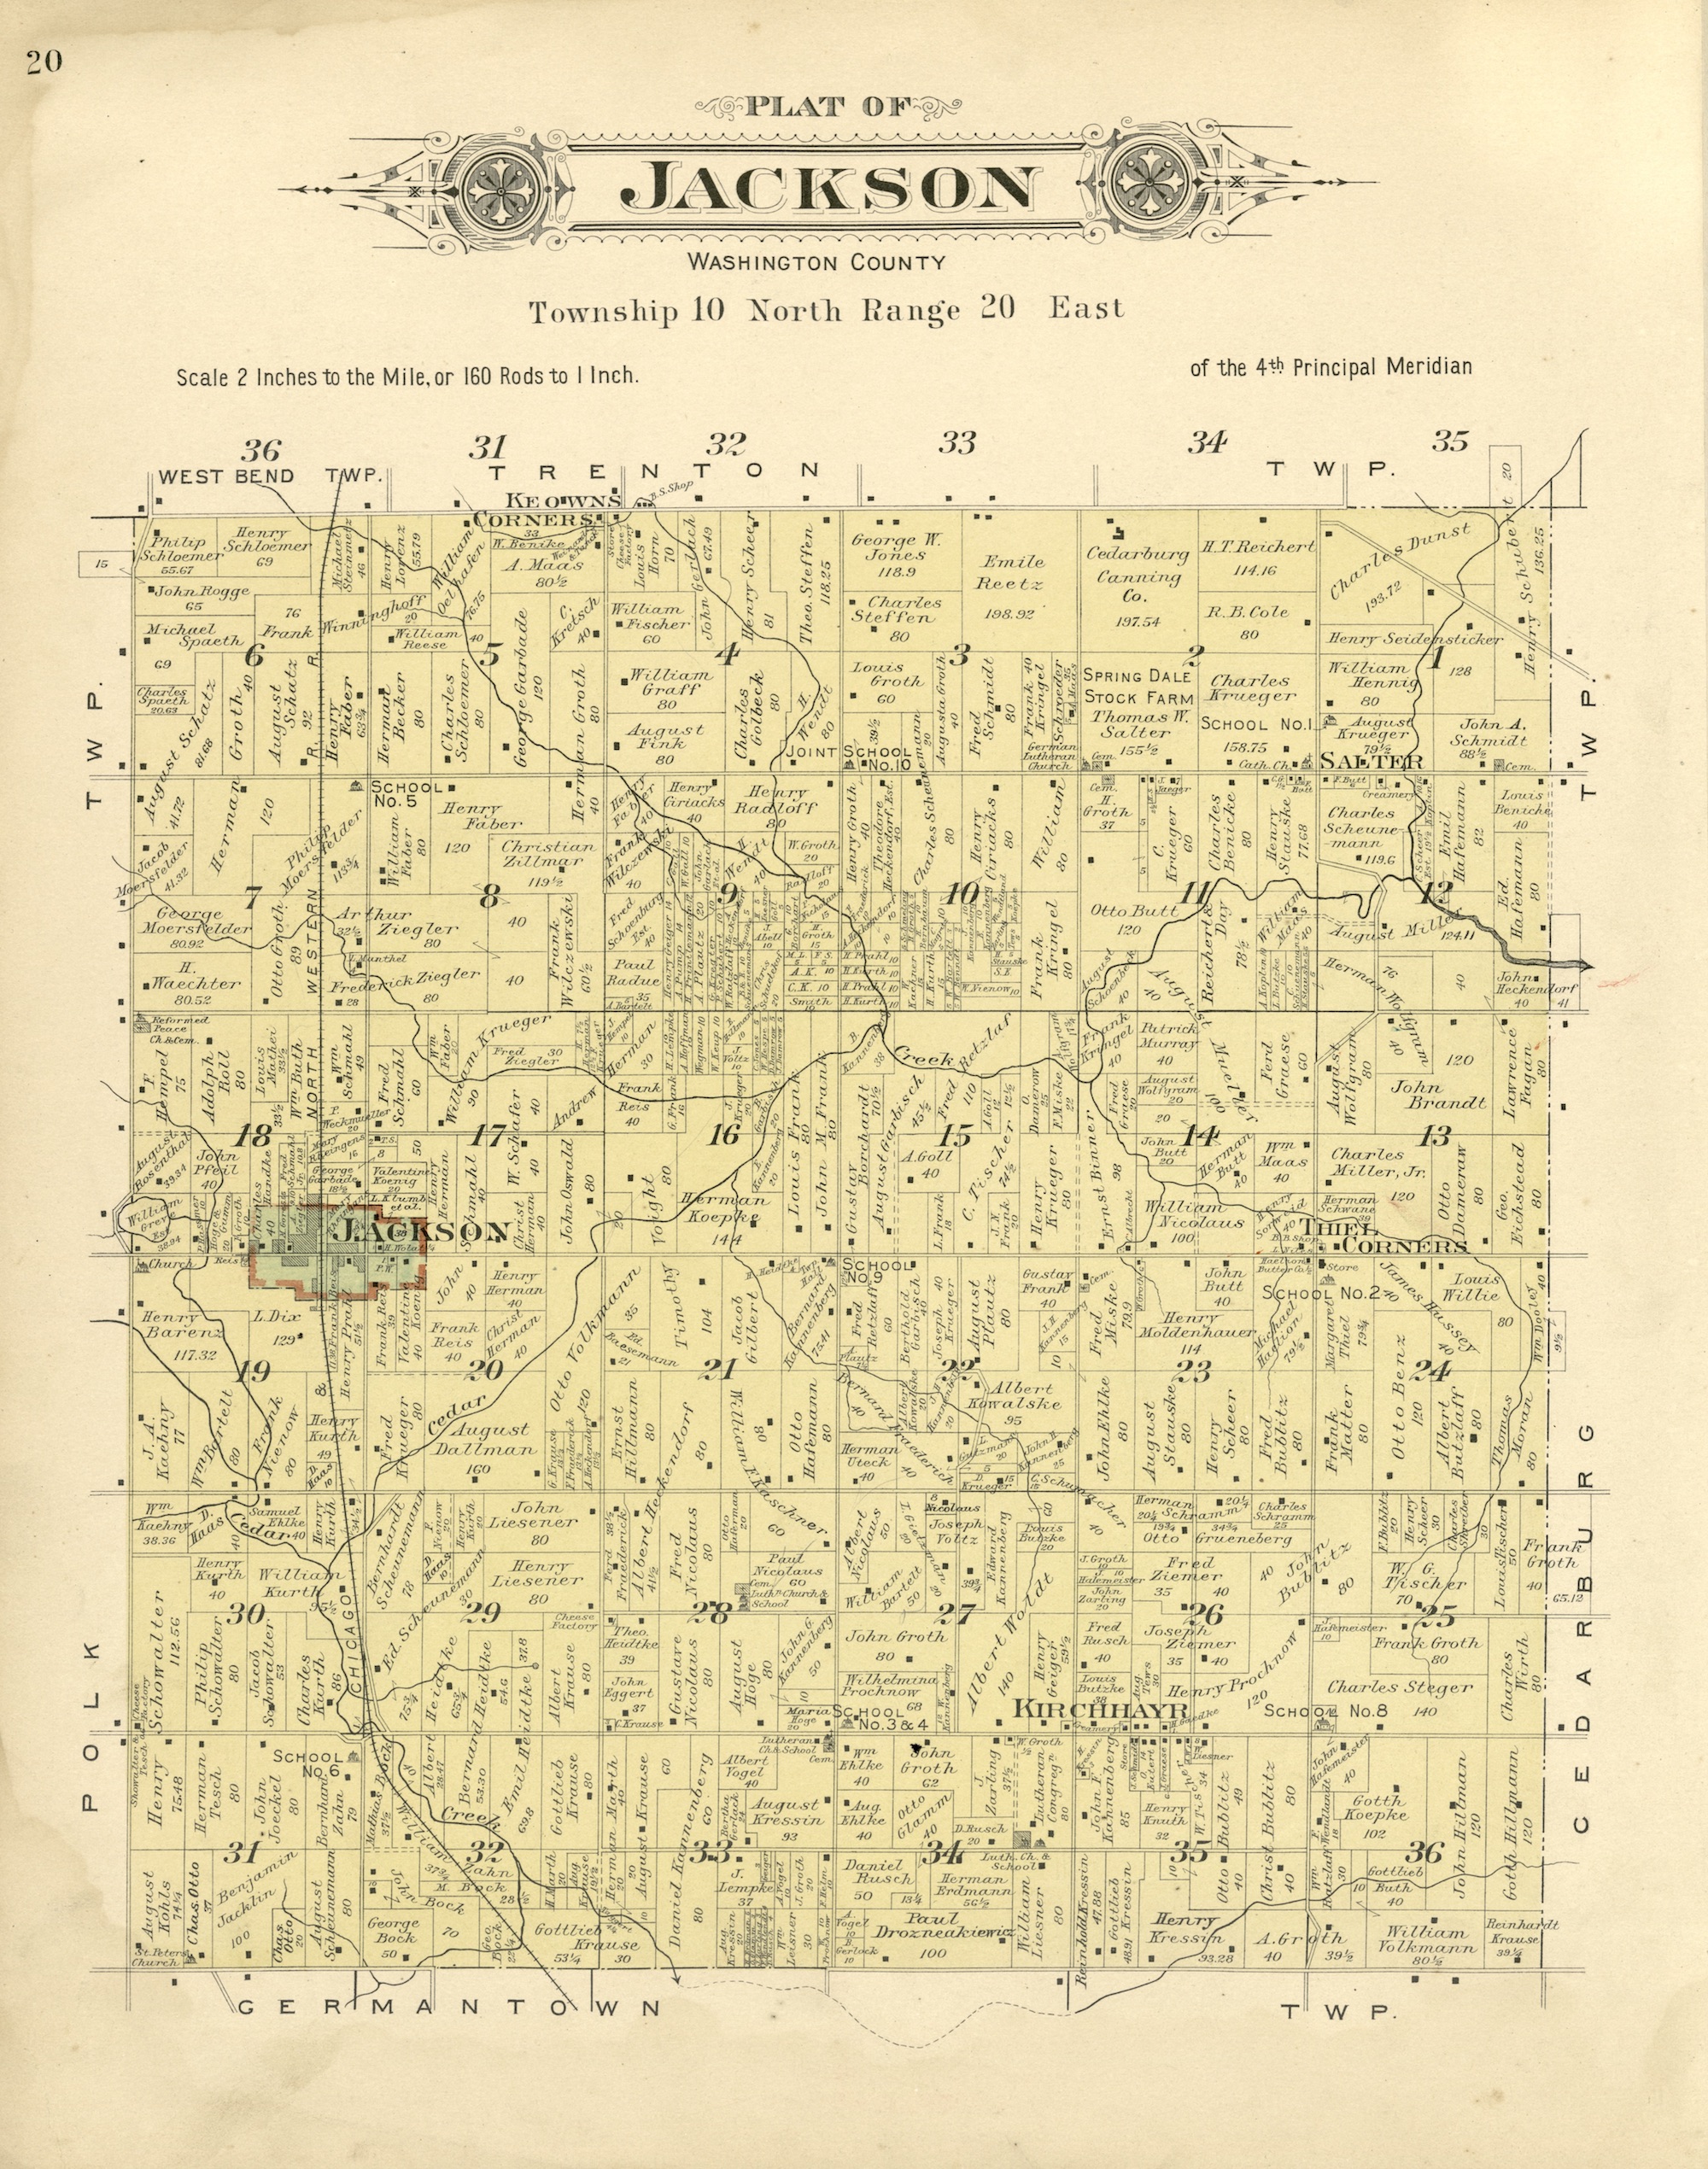 This 1915 map shows the Town of Jackson, with the Village of Jackson outlined in red, as well as the unincorporated communities of Salter, Thiel Corners, Kirchhayn, and Keowns Corners. 